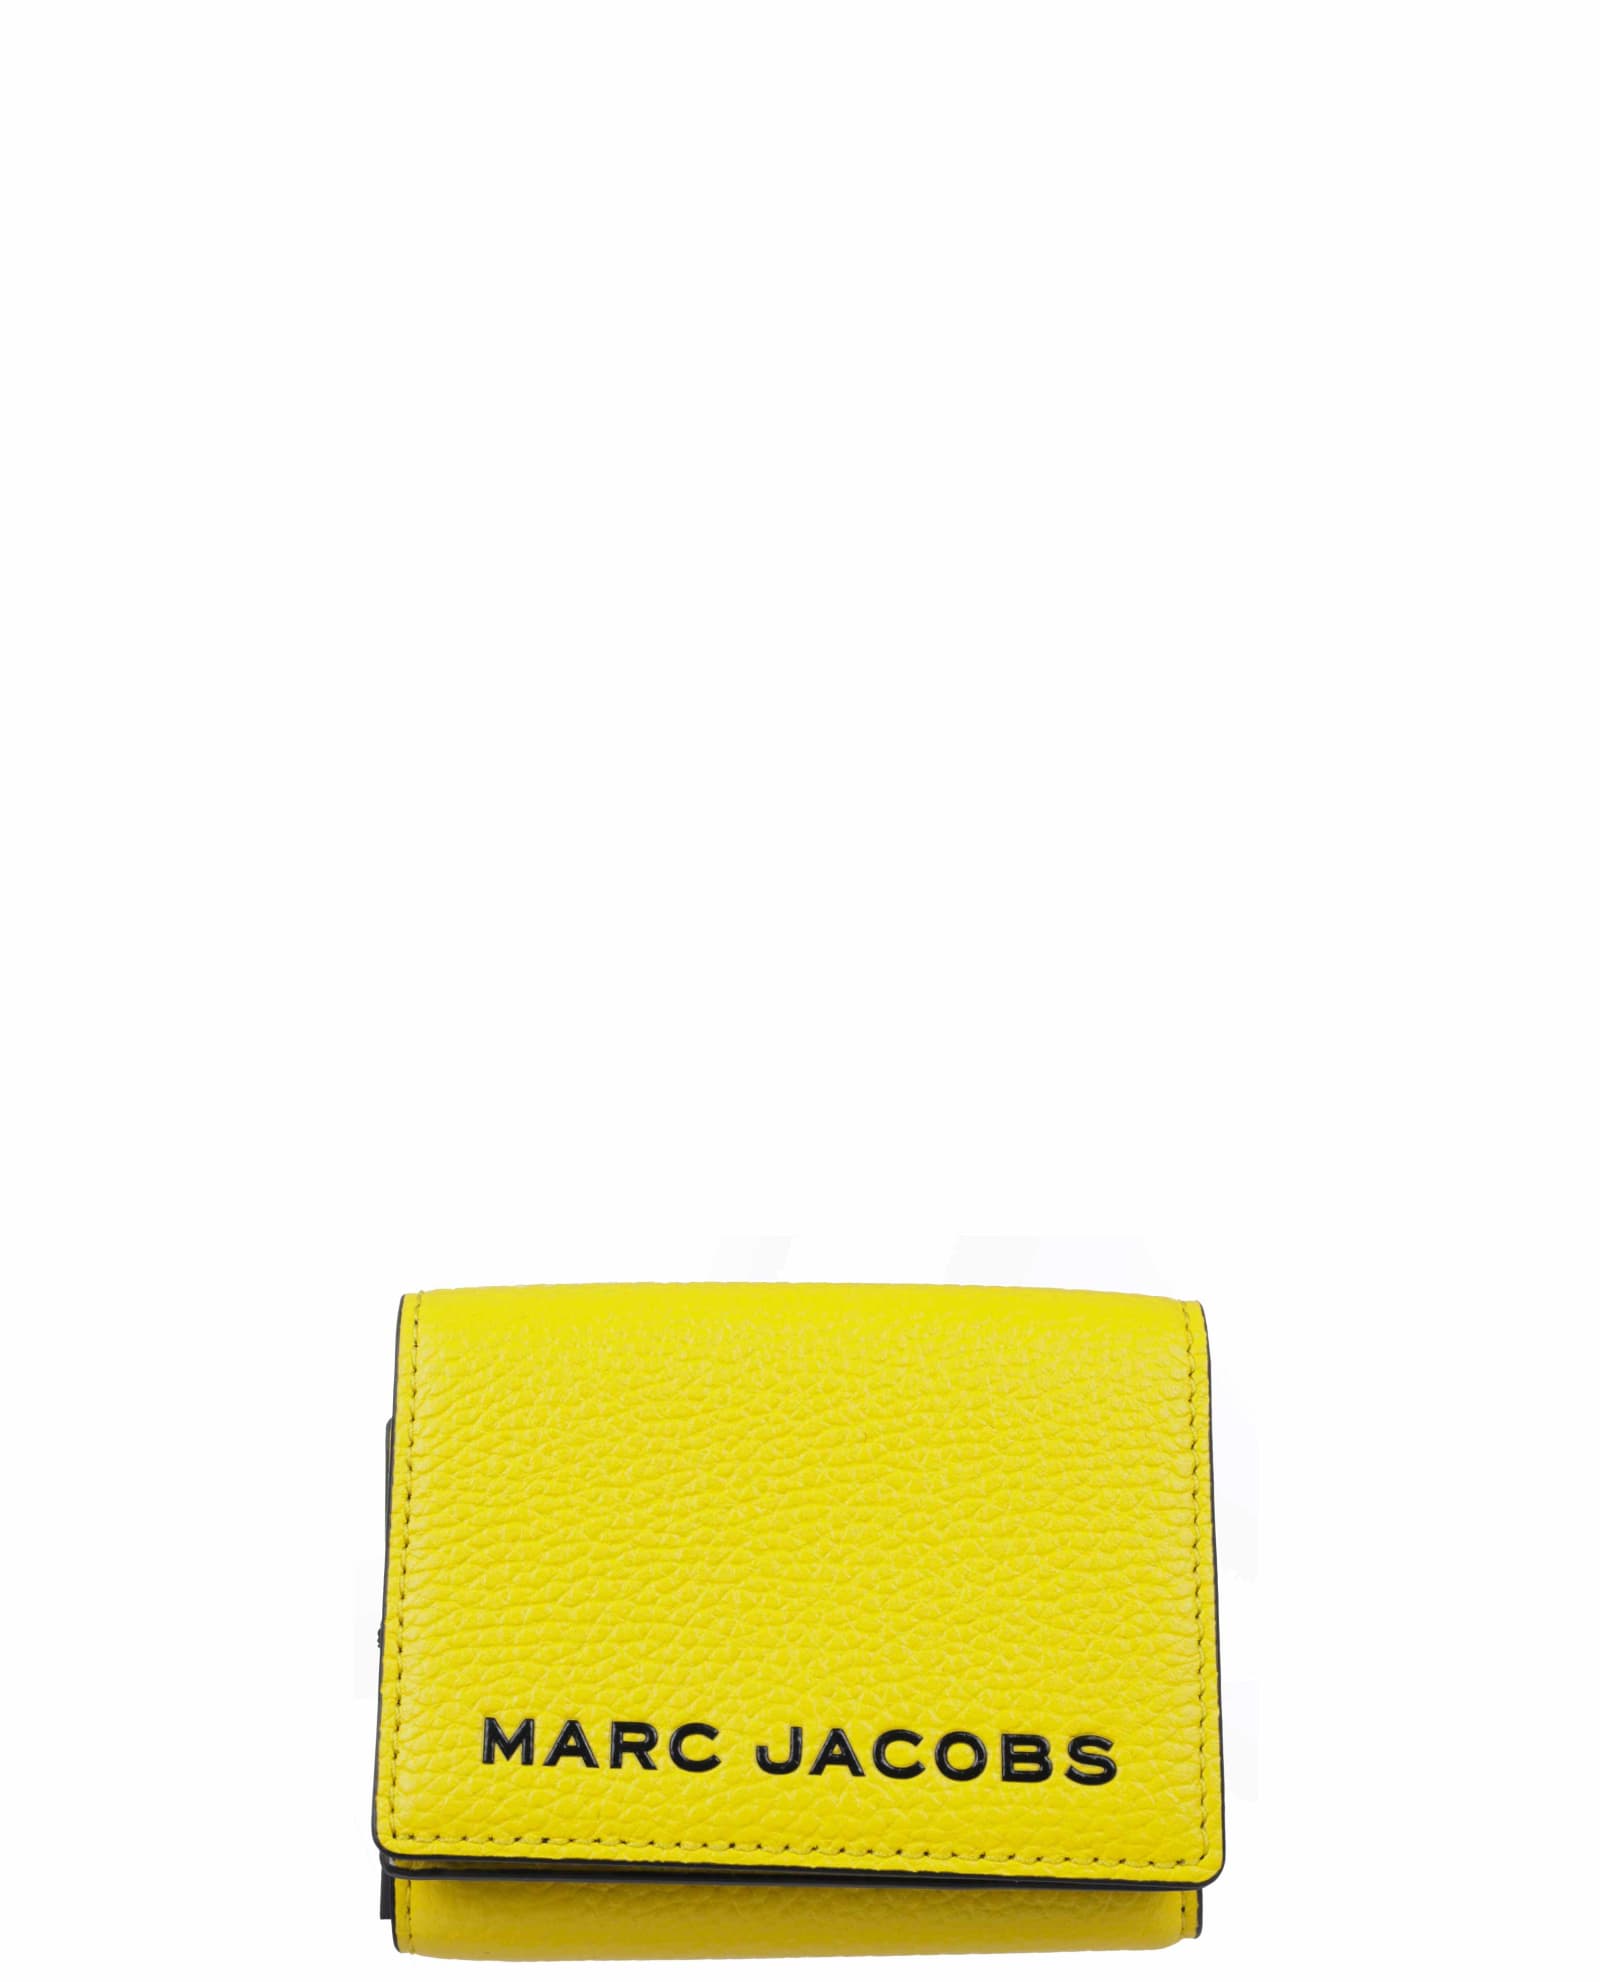 The Marc Jacobs Yellow Trifold Wallet M